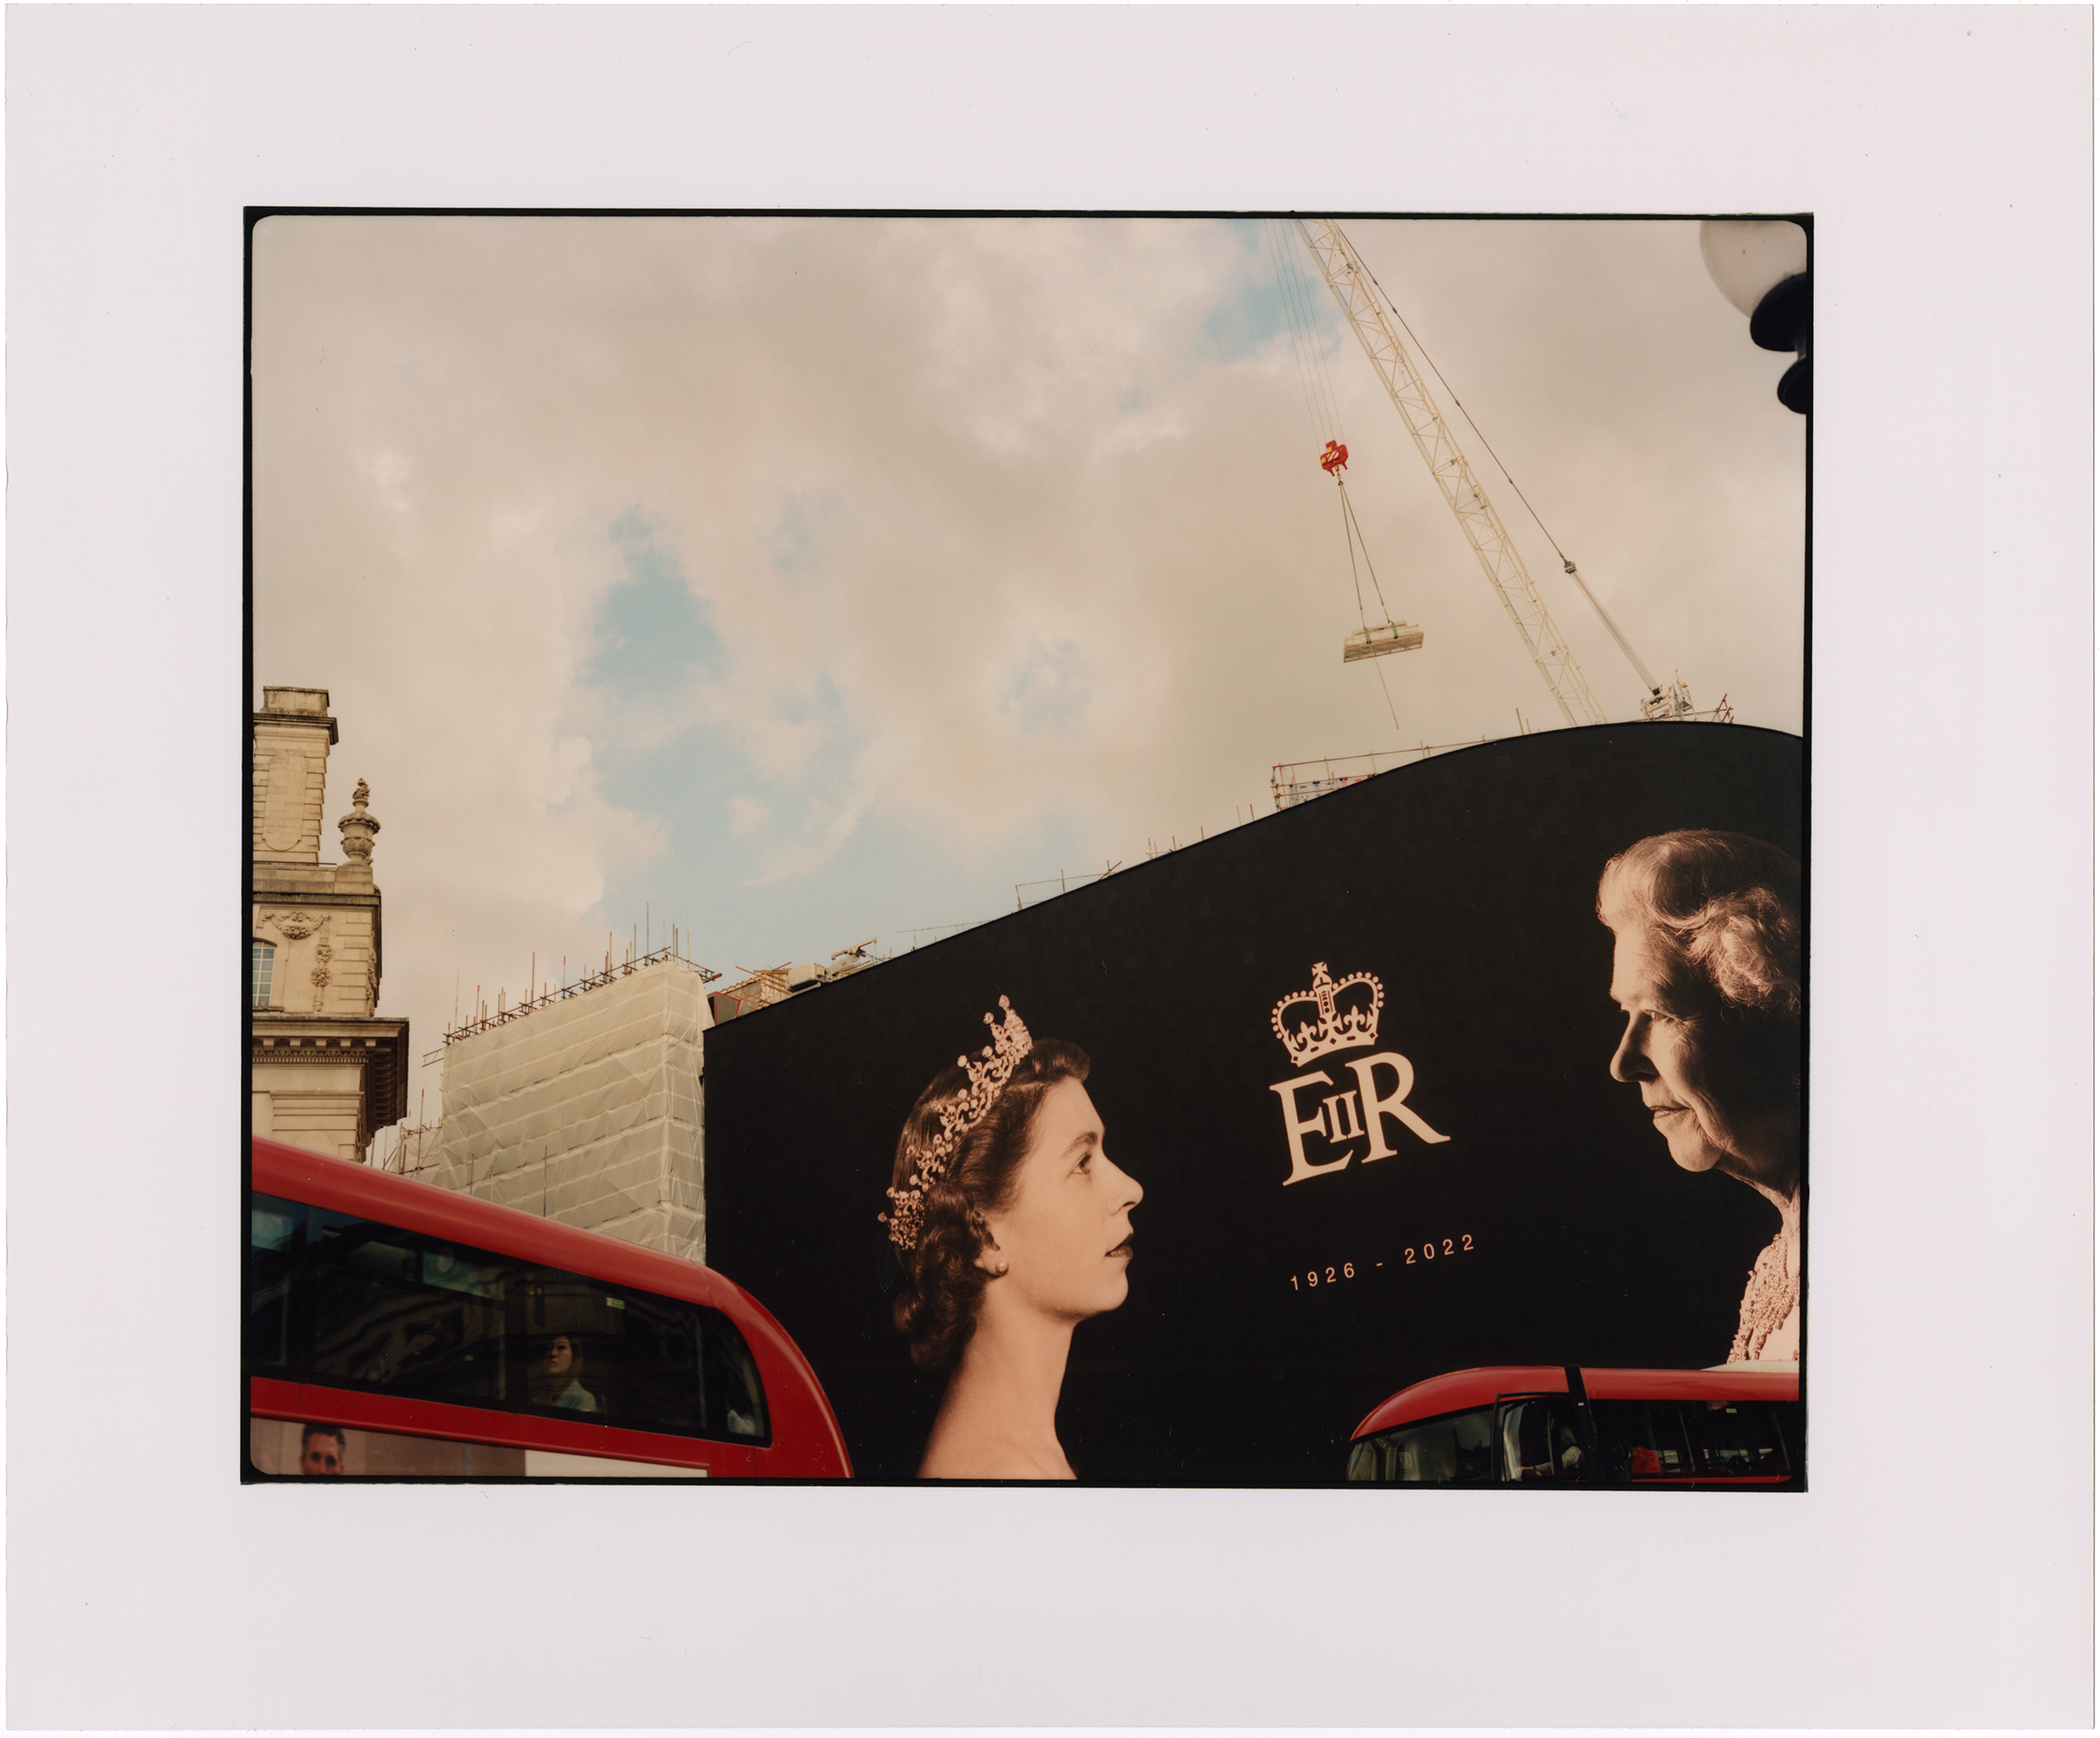 London, England (Jamie Hawkesworth for TIME)